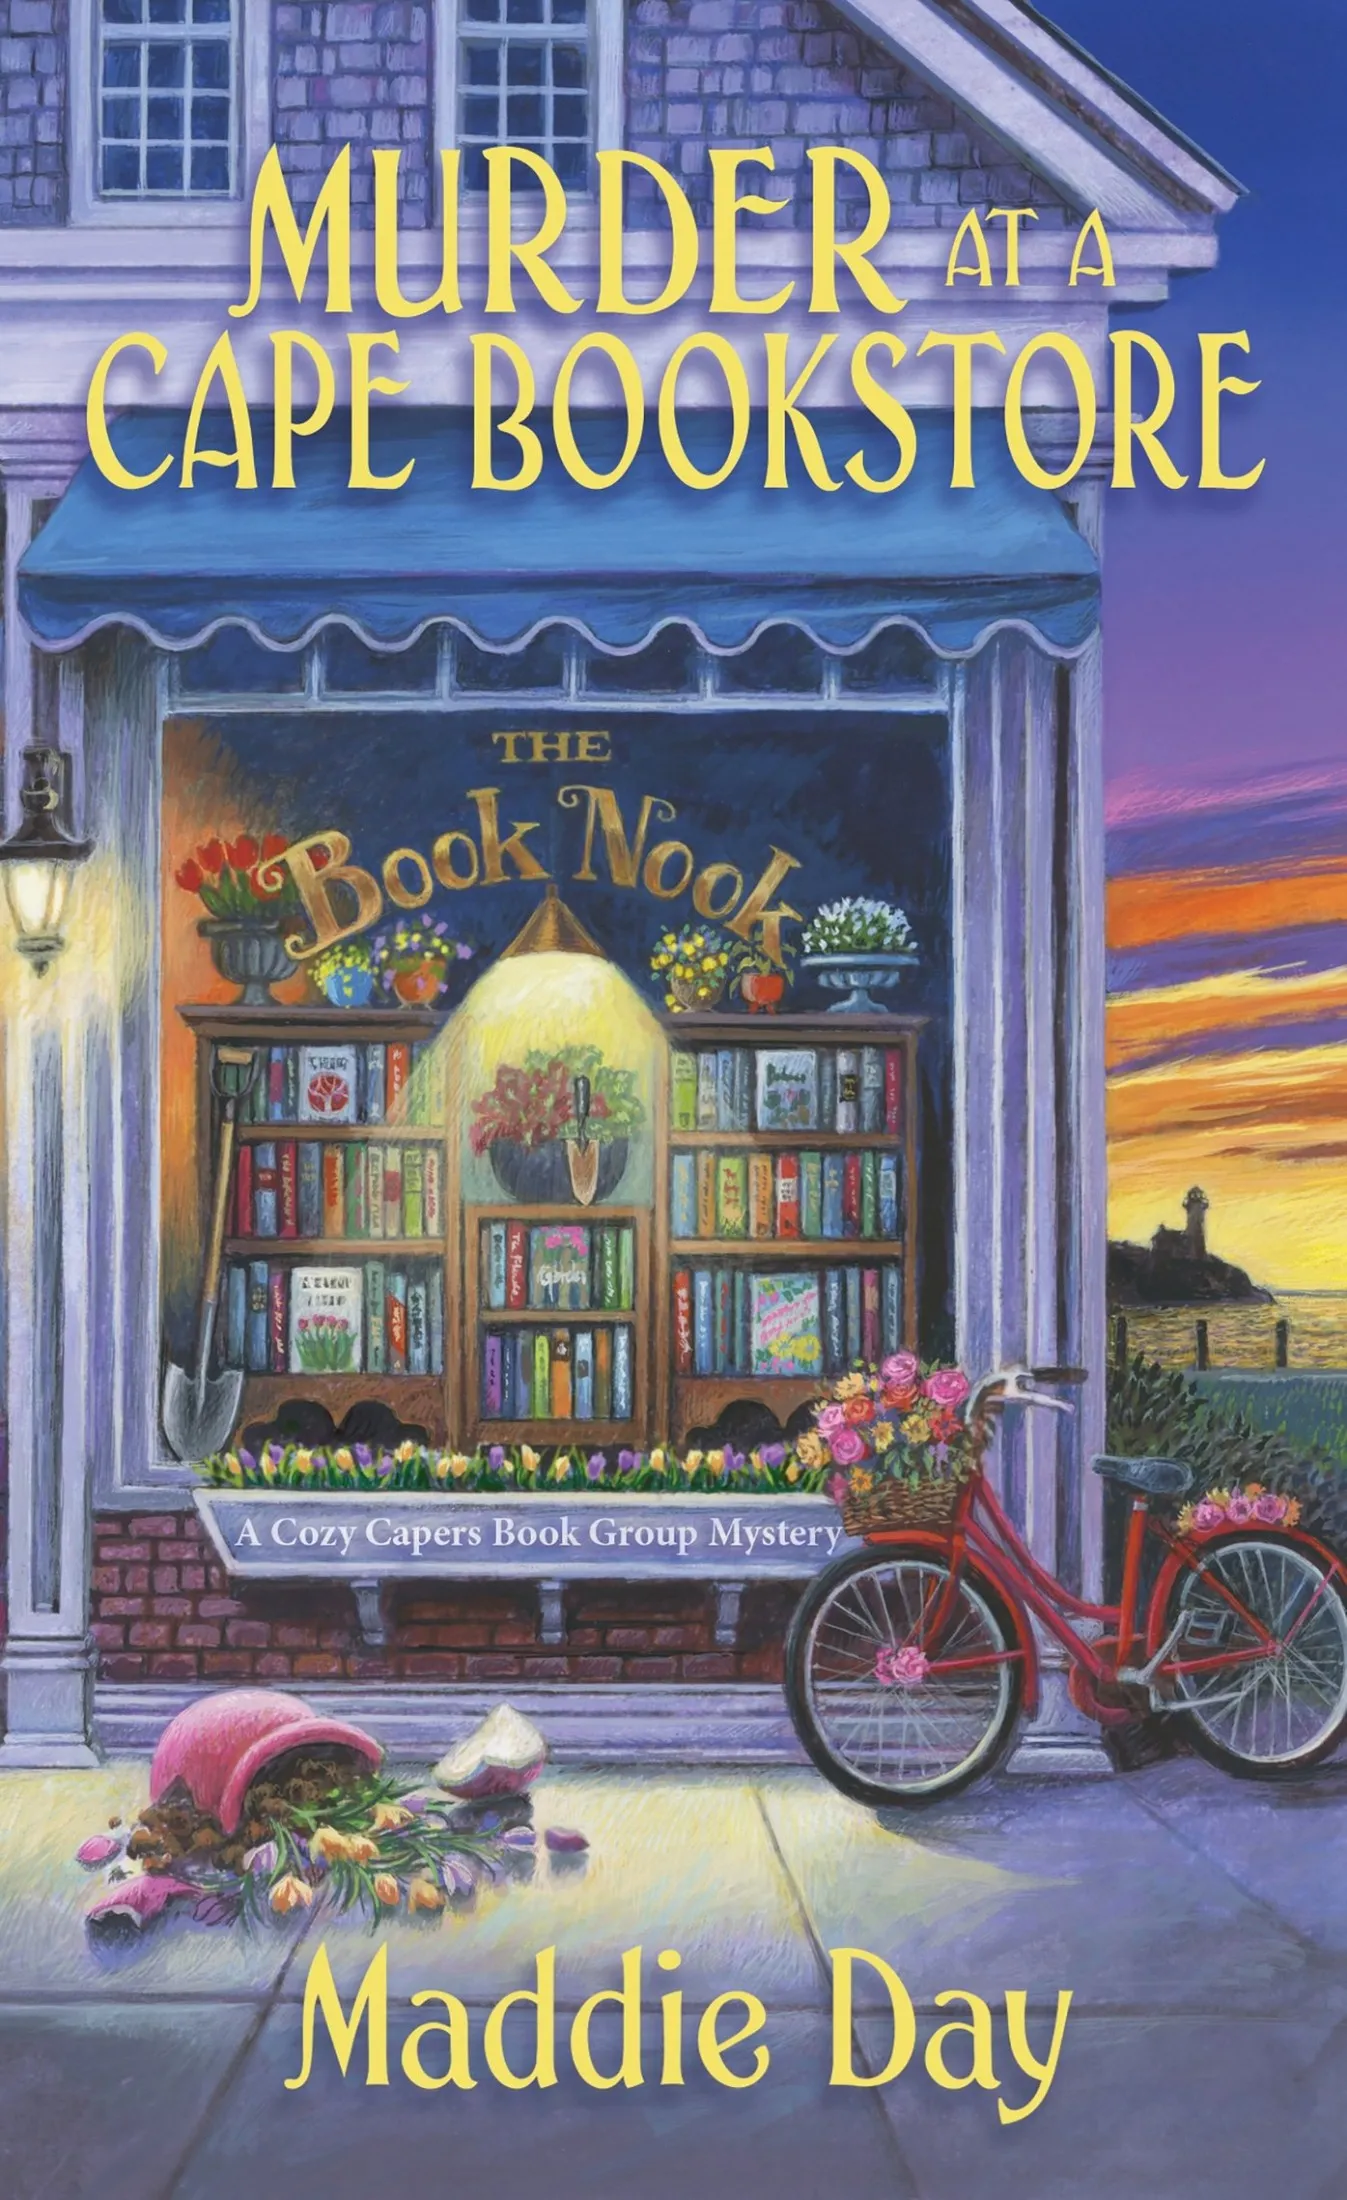 Murder at a Cape Bookstore (A Cozy Capers Group Mystery #5)